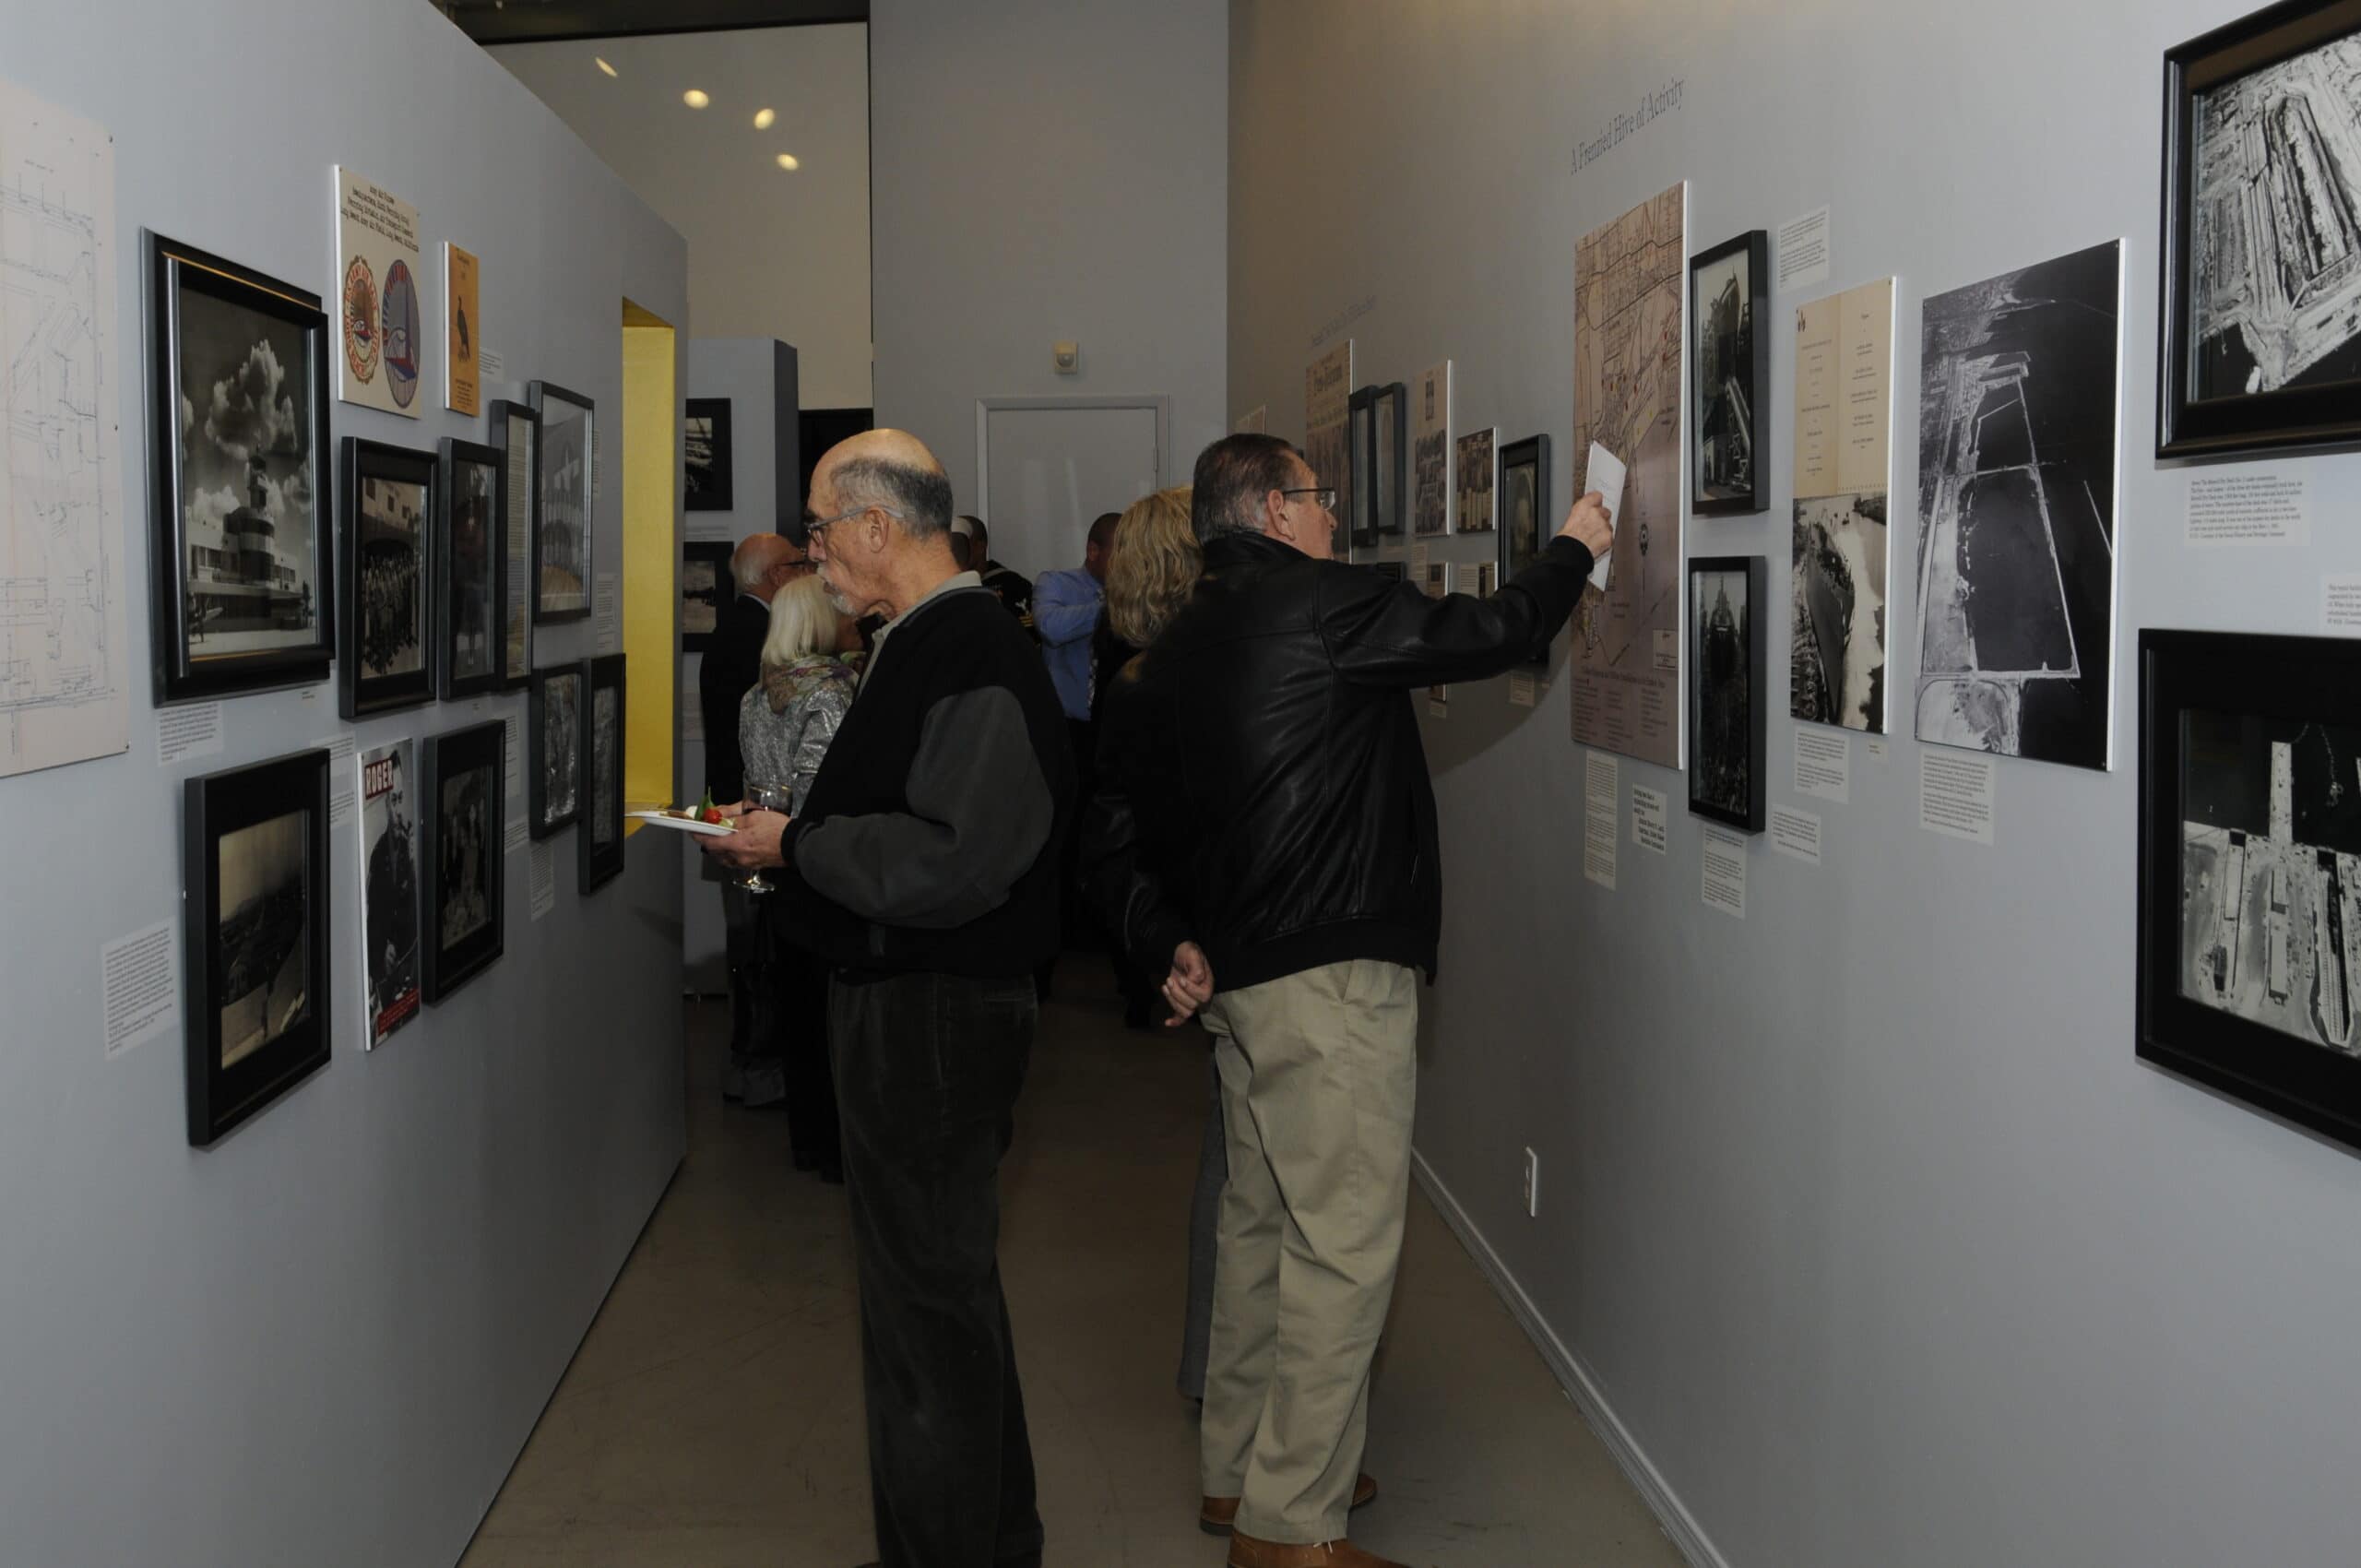 Pearl Harbor Opening Reception historical photographs